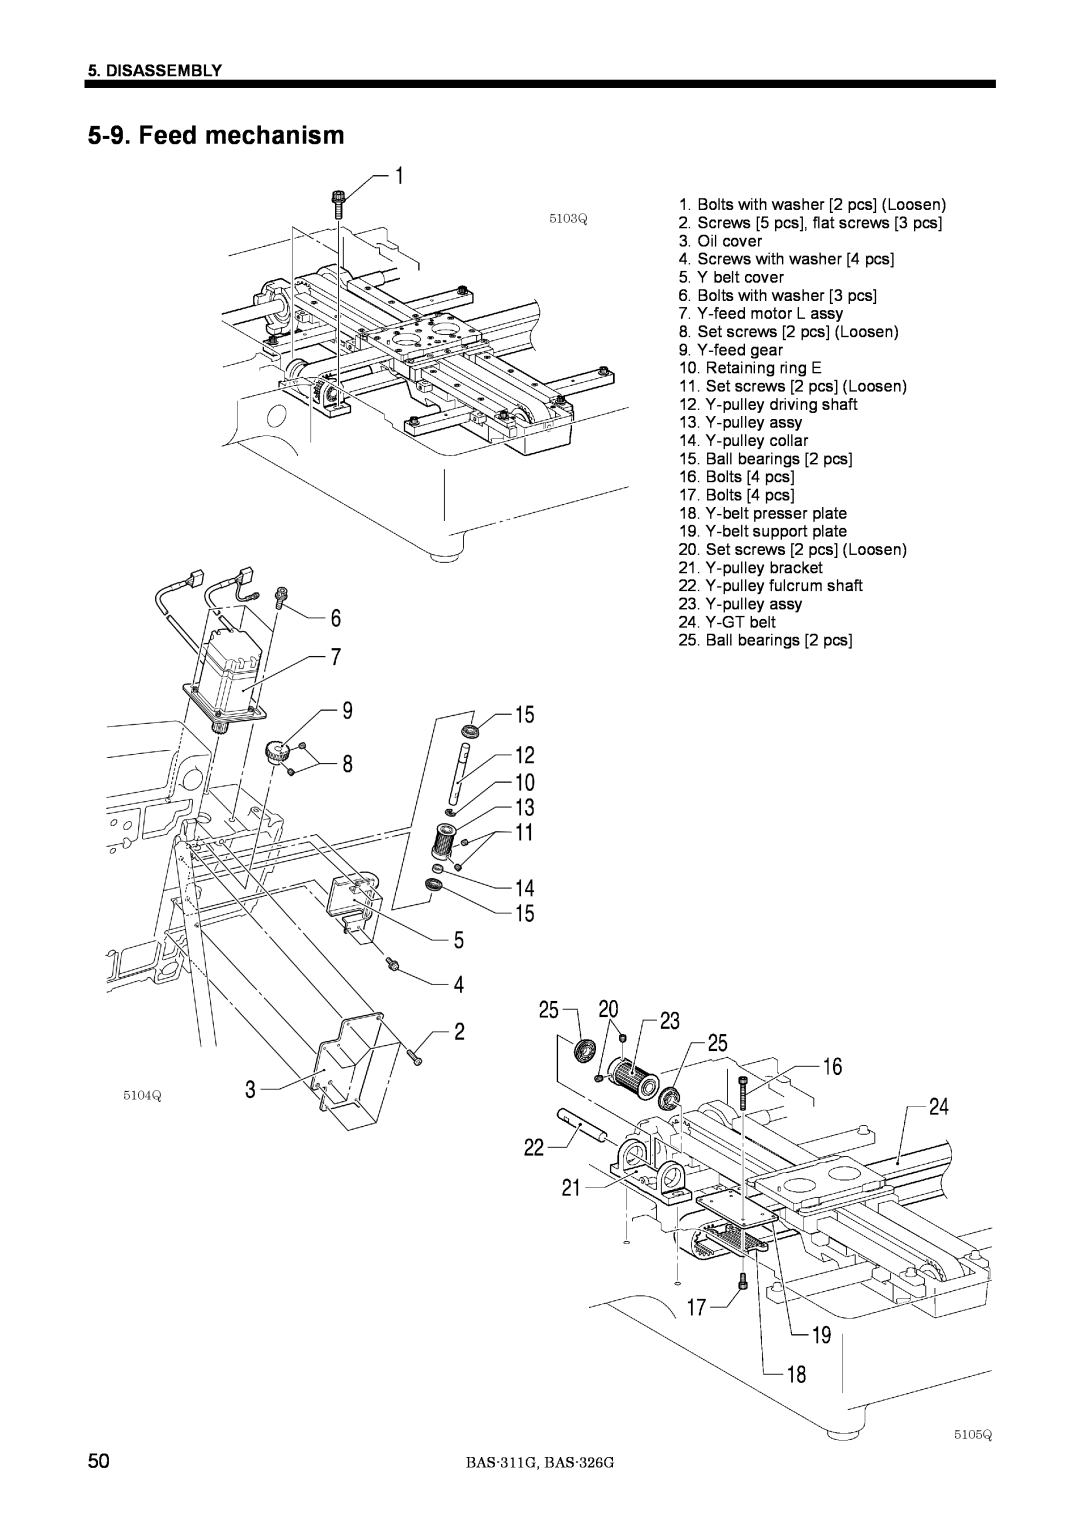 Brother BAS-311G service manual Feed mechanism, Disassembly 